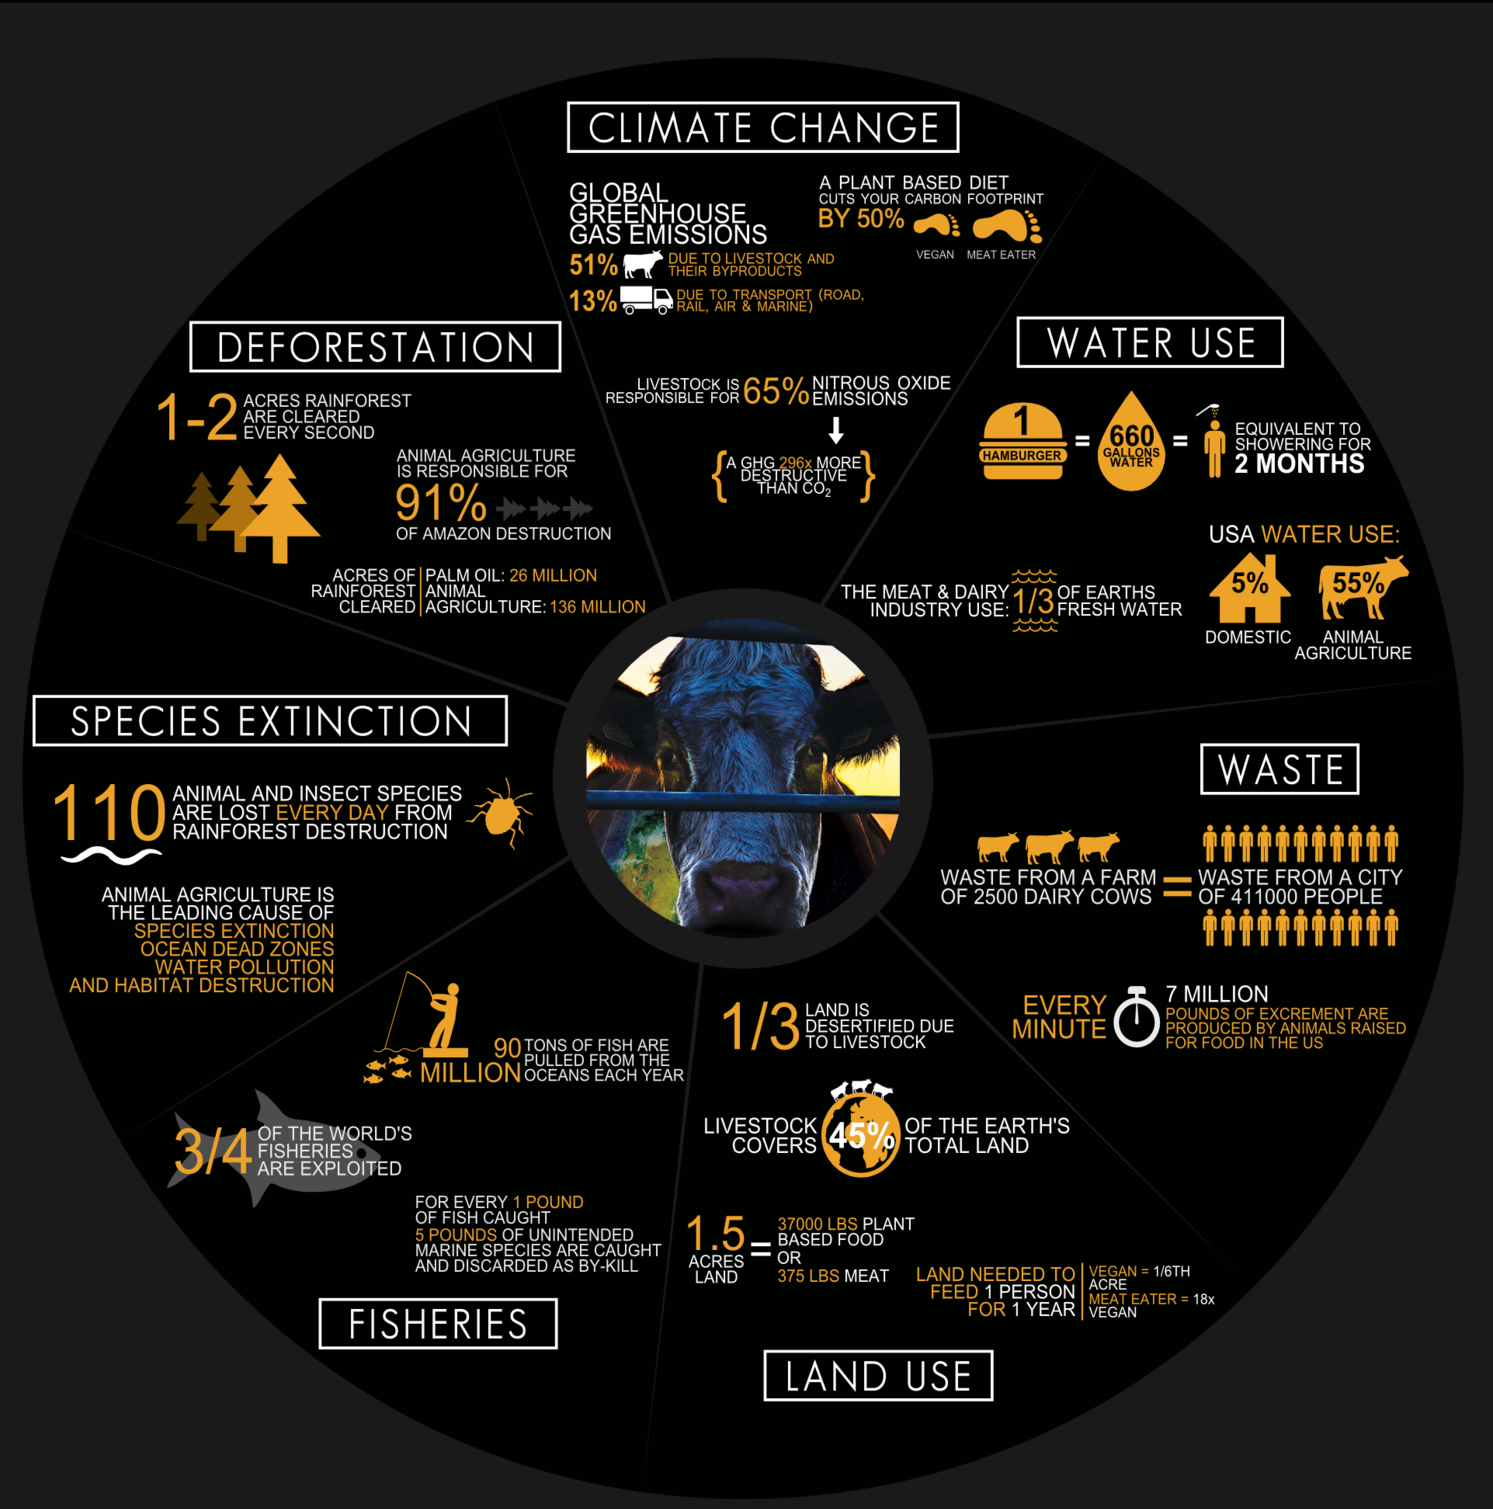 PICTURED: The Cowspiracy infographic, still touting false information even though their own sources have drastically changed their estimates.